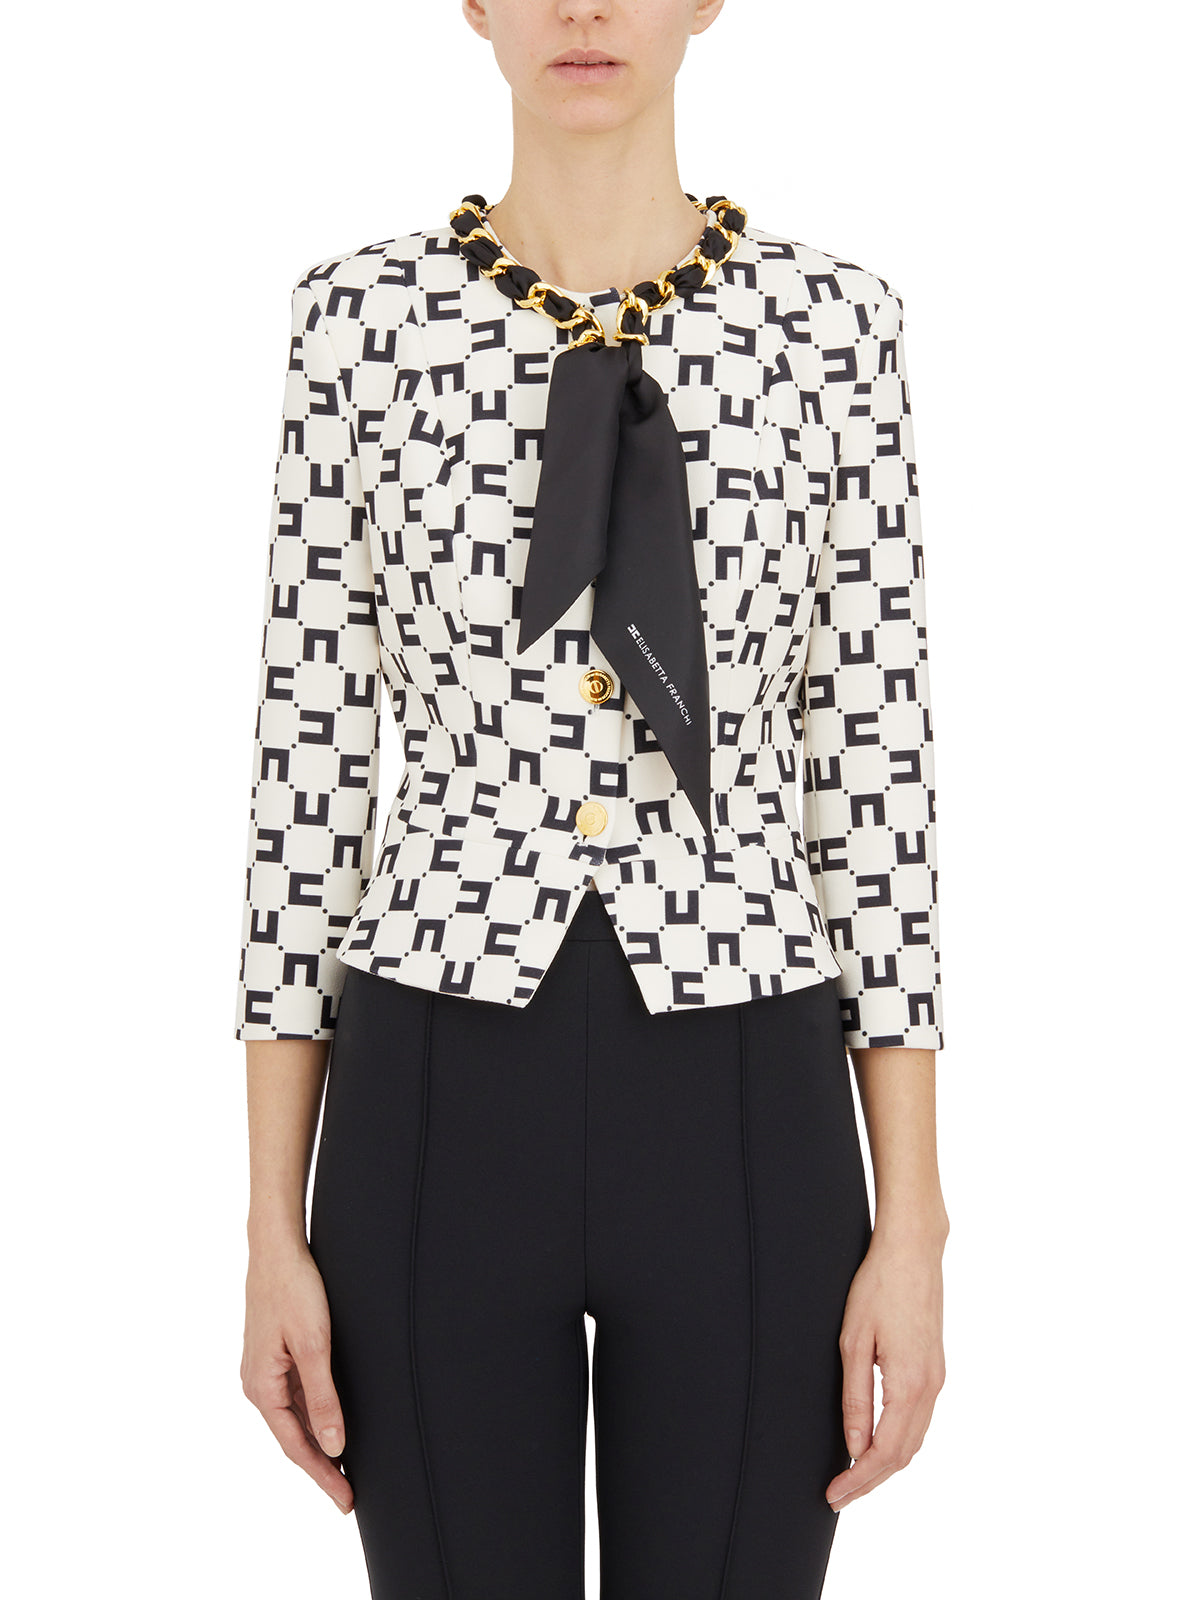 ELISABETTA FRANCHI Foulard Style Jacket in Monogram Satin Lining with Gold Metal Accents